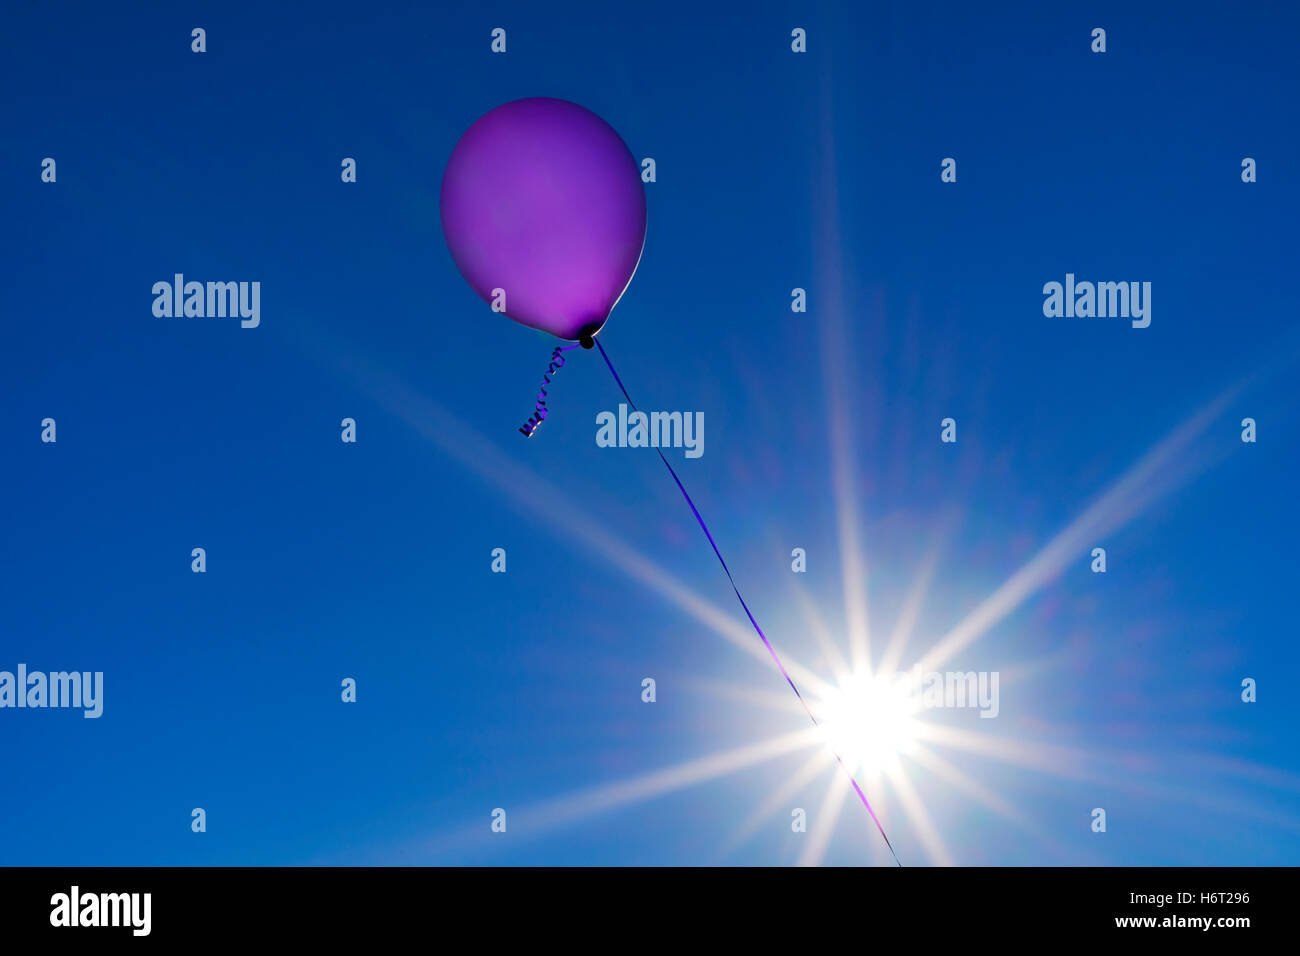 A purple balloon against the early evening sky. Stock Photo